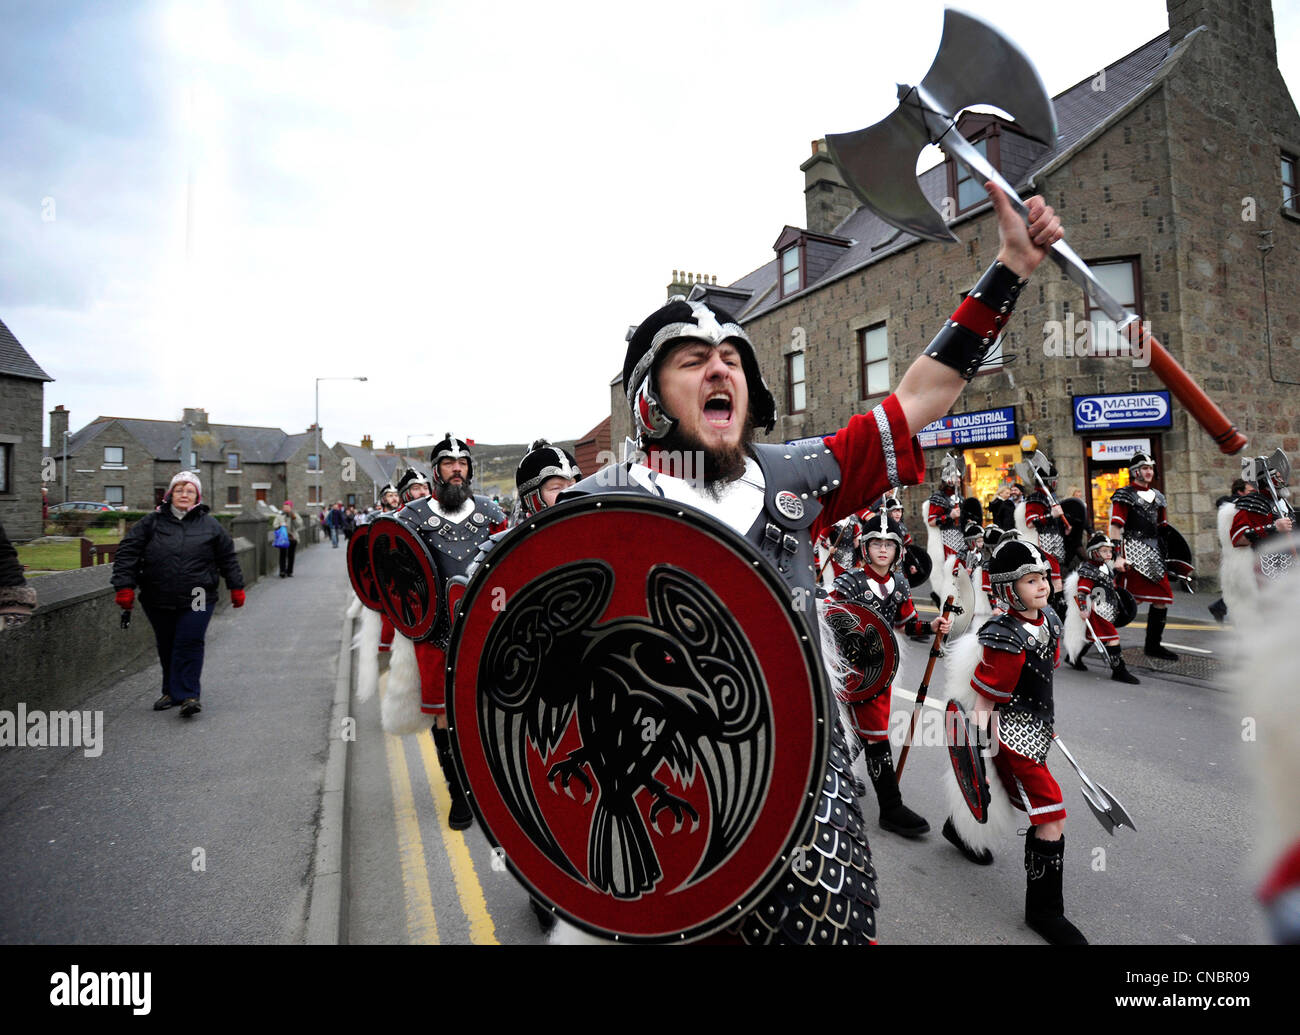 Men dressed in Viking costume take part in the annual Up Helly Aa festival in Lerwick, Shetland Island, Scotland. Stock Photo